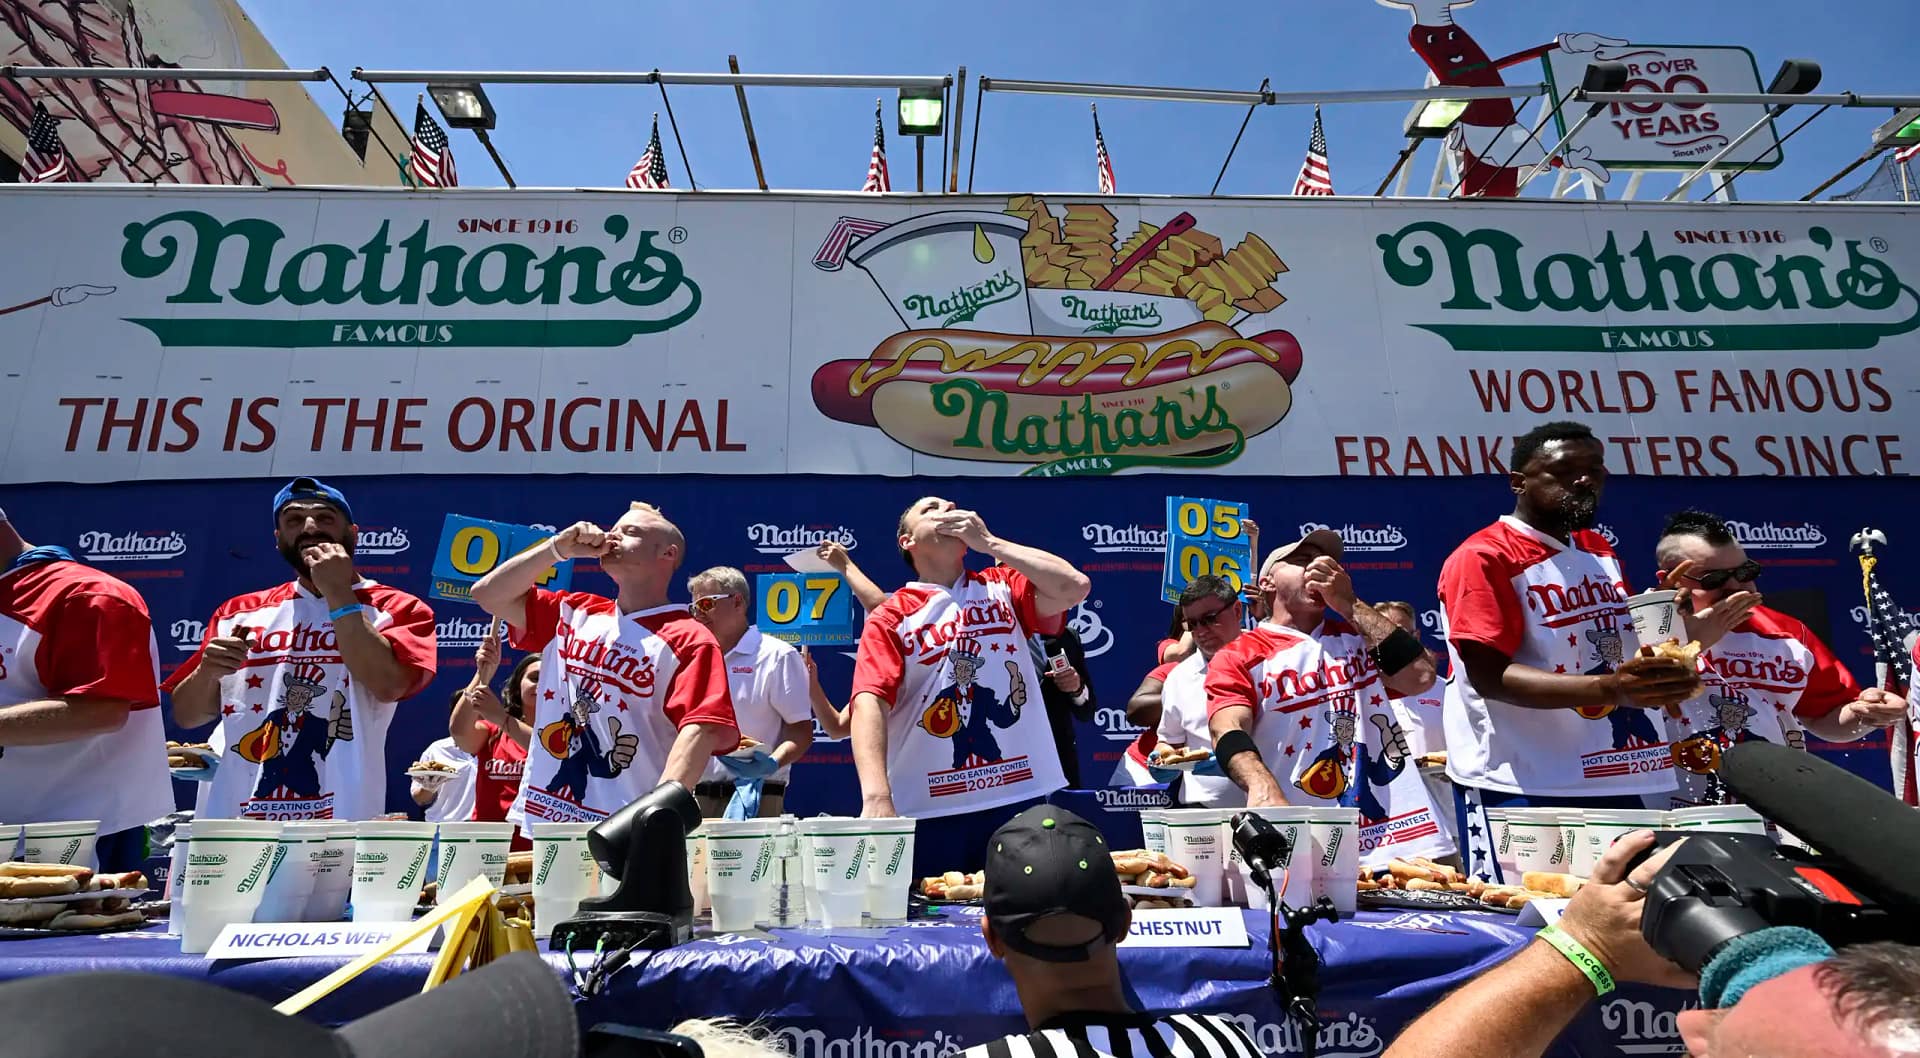 The Fourth of July Hot Dog Eating Contest: A Unique American Spectacle